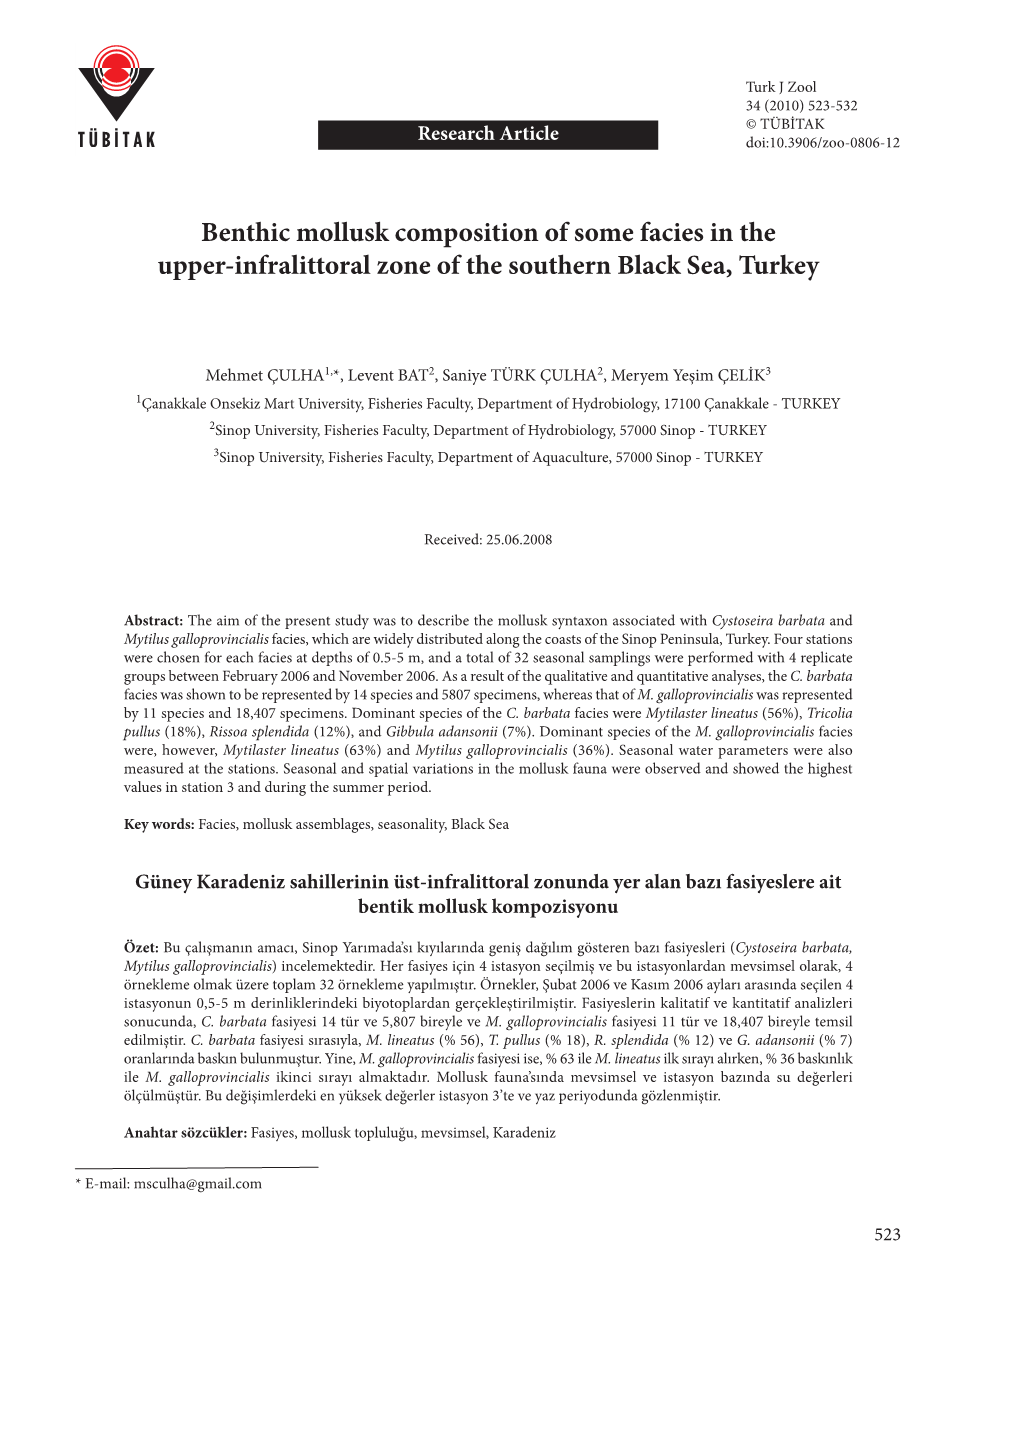 Benthic Mollusk Composition of Some Facies in the Upper-Infralittoral Zone of the Southern Black Sea, Turkey